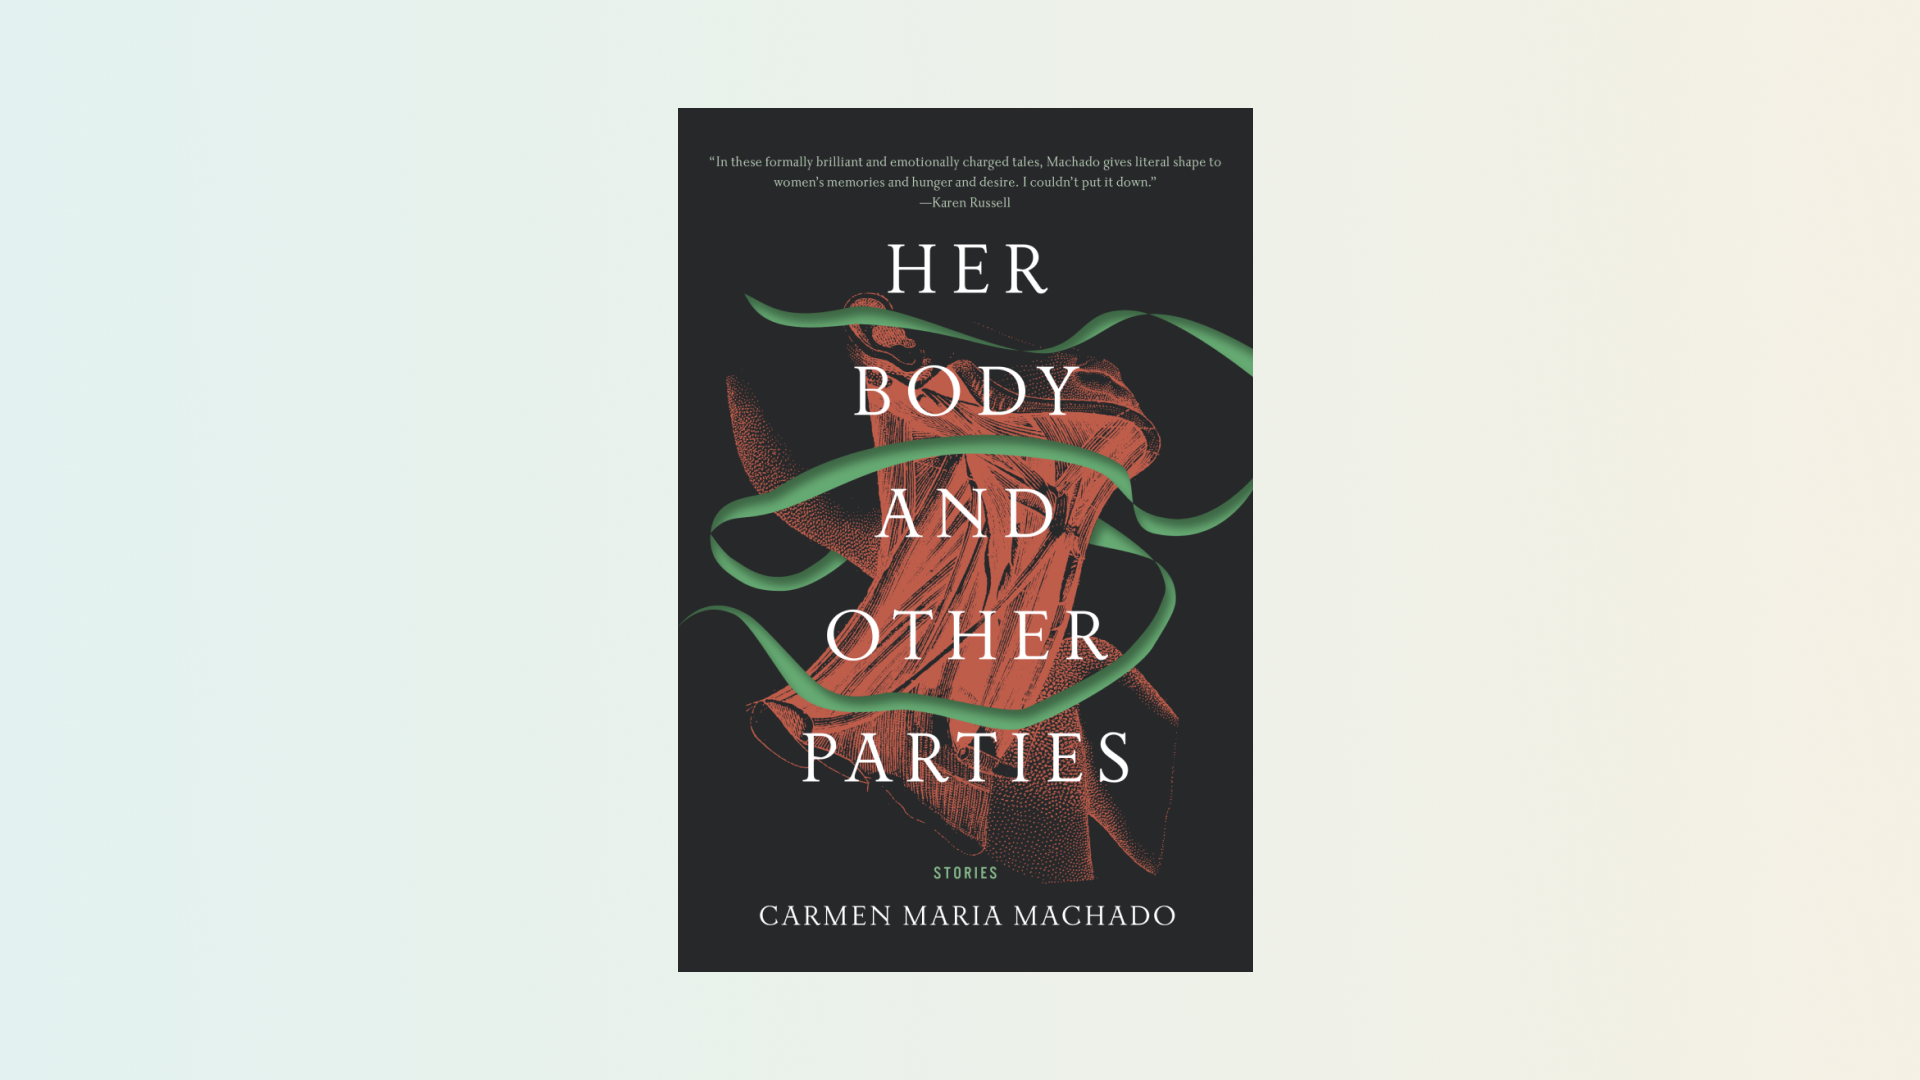 “Her Body and Other Parties” by Carmen Maria Machado